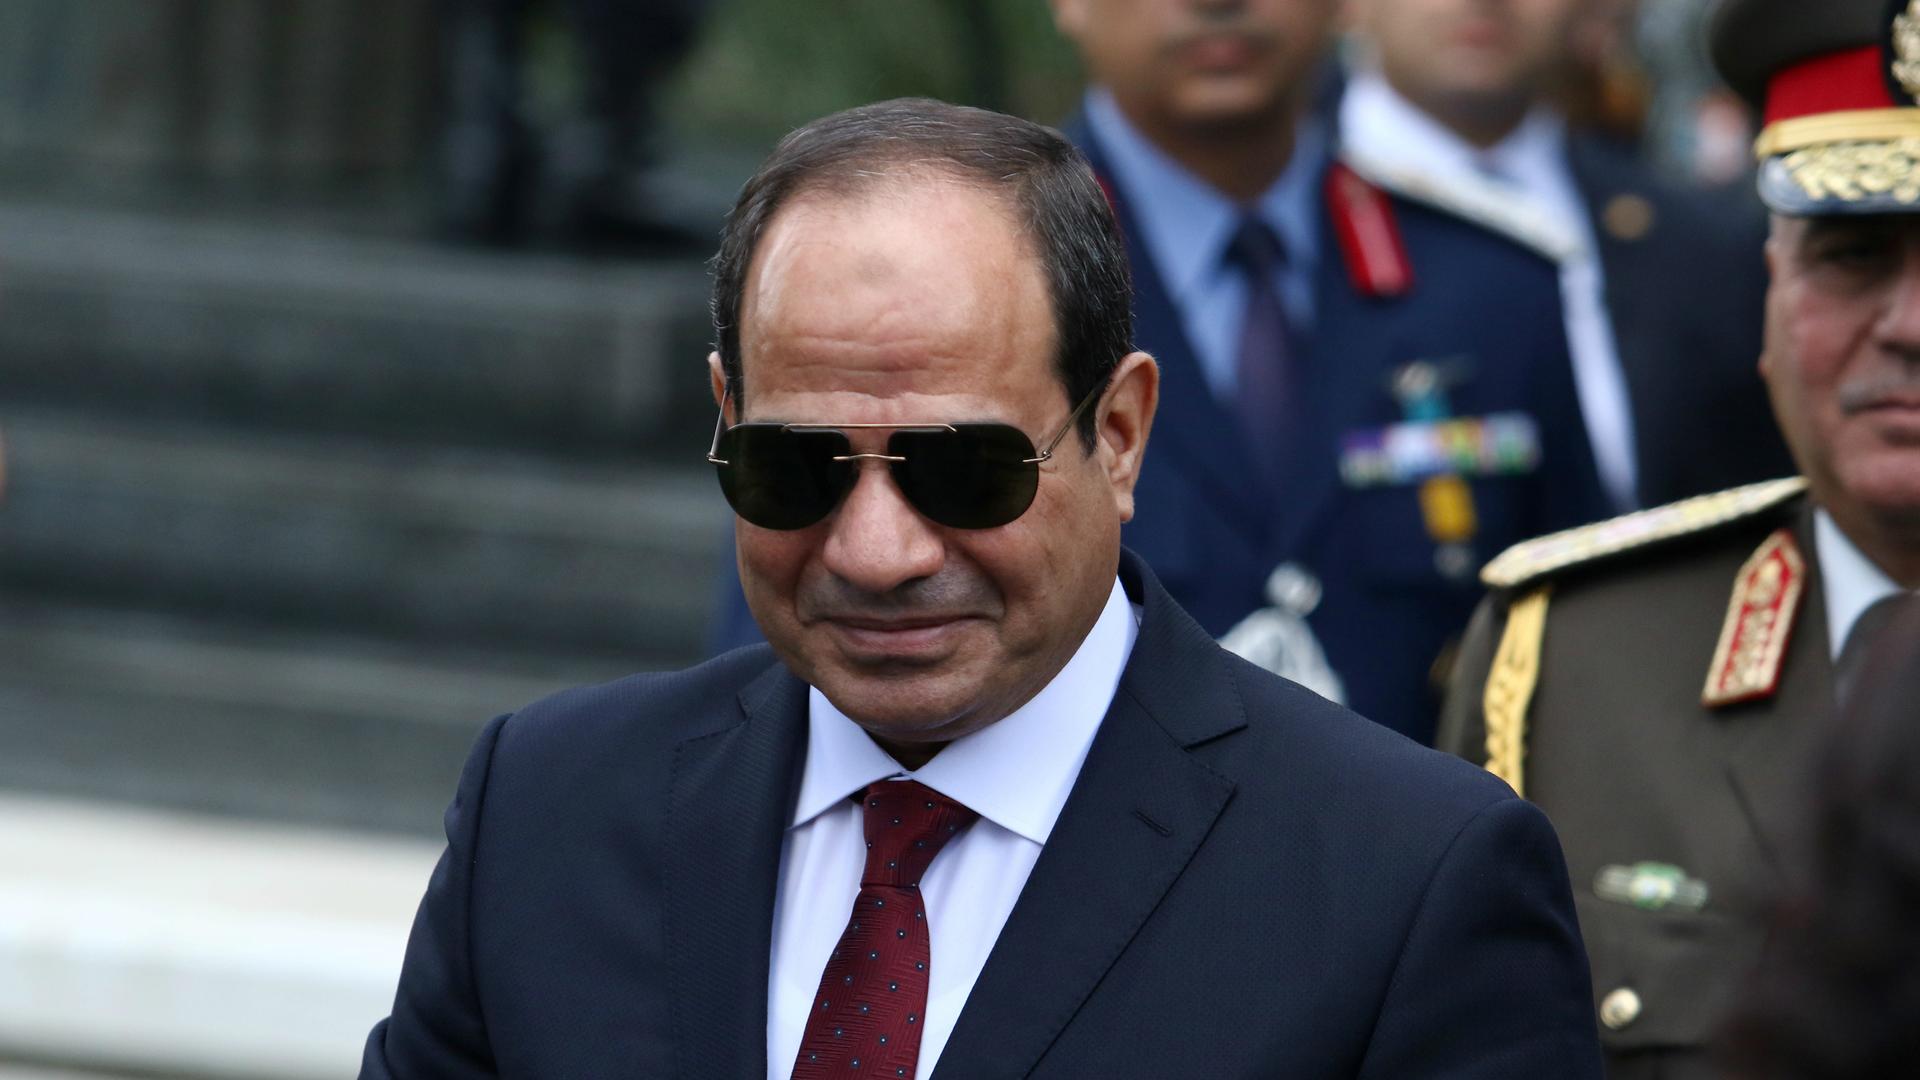 Egyptian President Abdul Fattah al-Sisi attends a welcome ceremony at the Presidential Palace in Nicosia, Cyprus, Nov. 20, 2017.